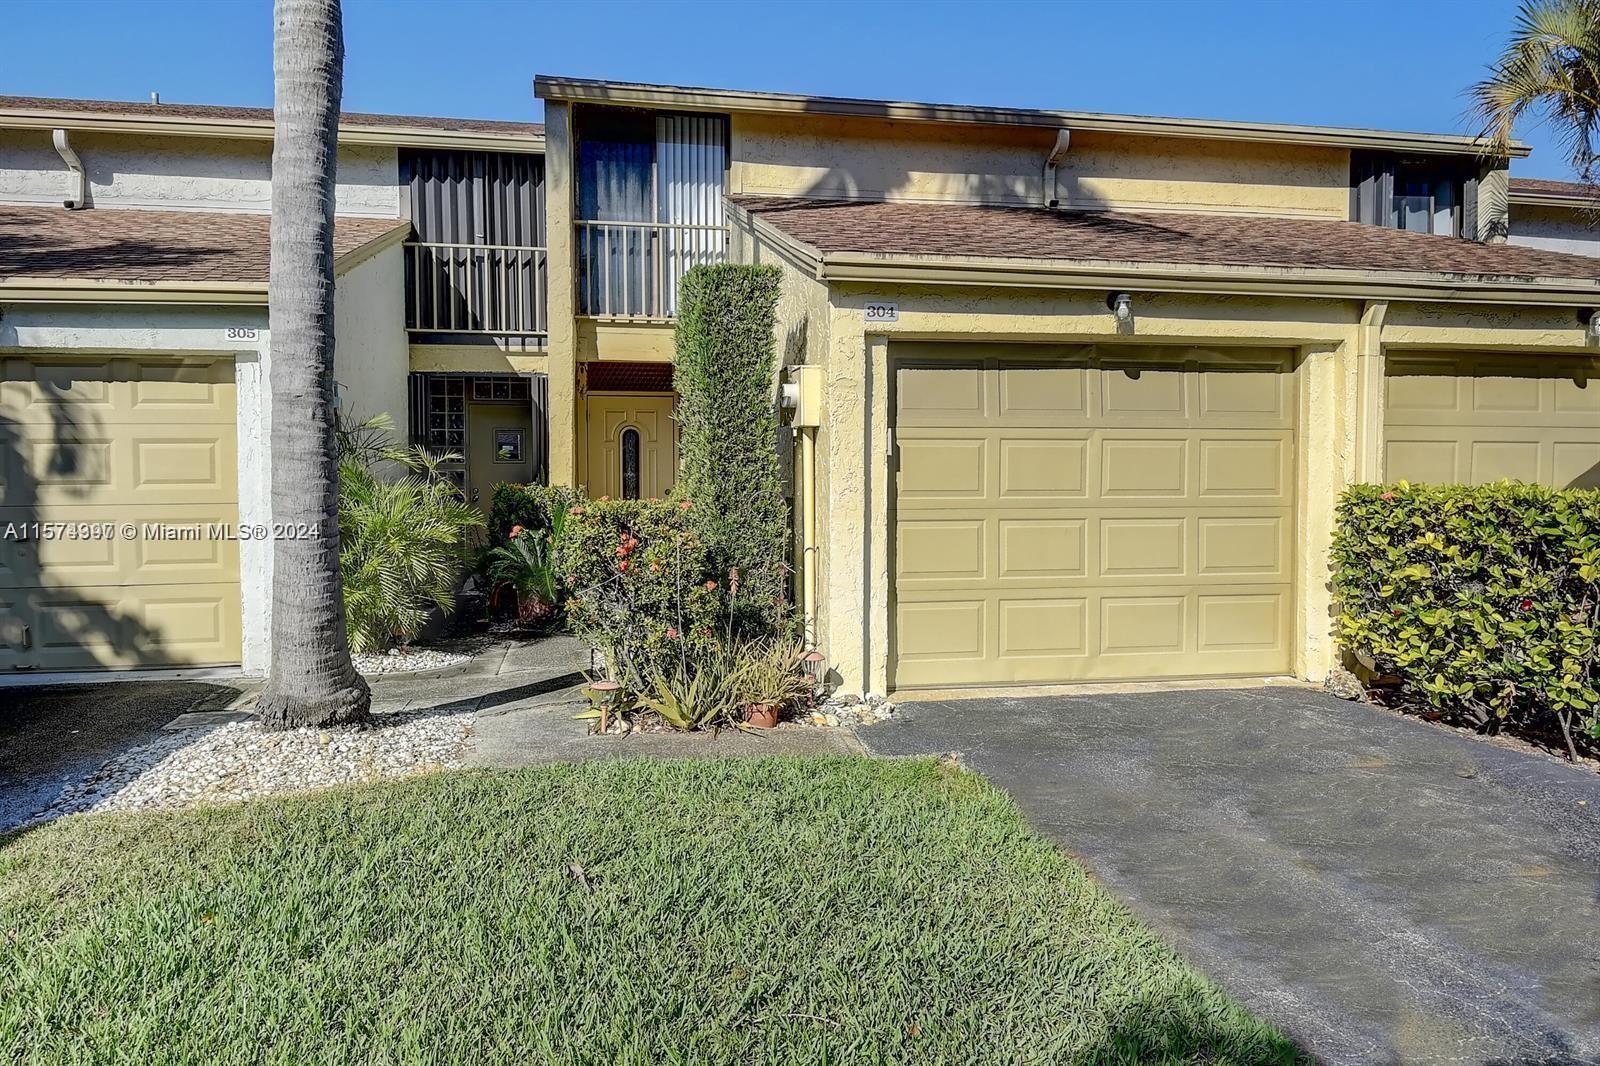 2/2.5 TOWNHOME IN BOCA PINAR. REMODELED UNIT WITH OPEN FLOORPLAN. TILE THROUGHOUT LIVING AREAS DOWNS